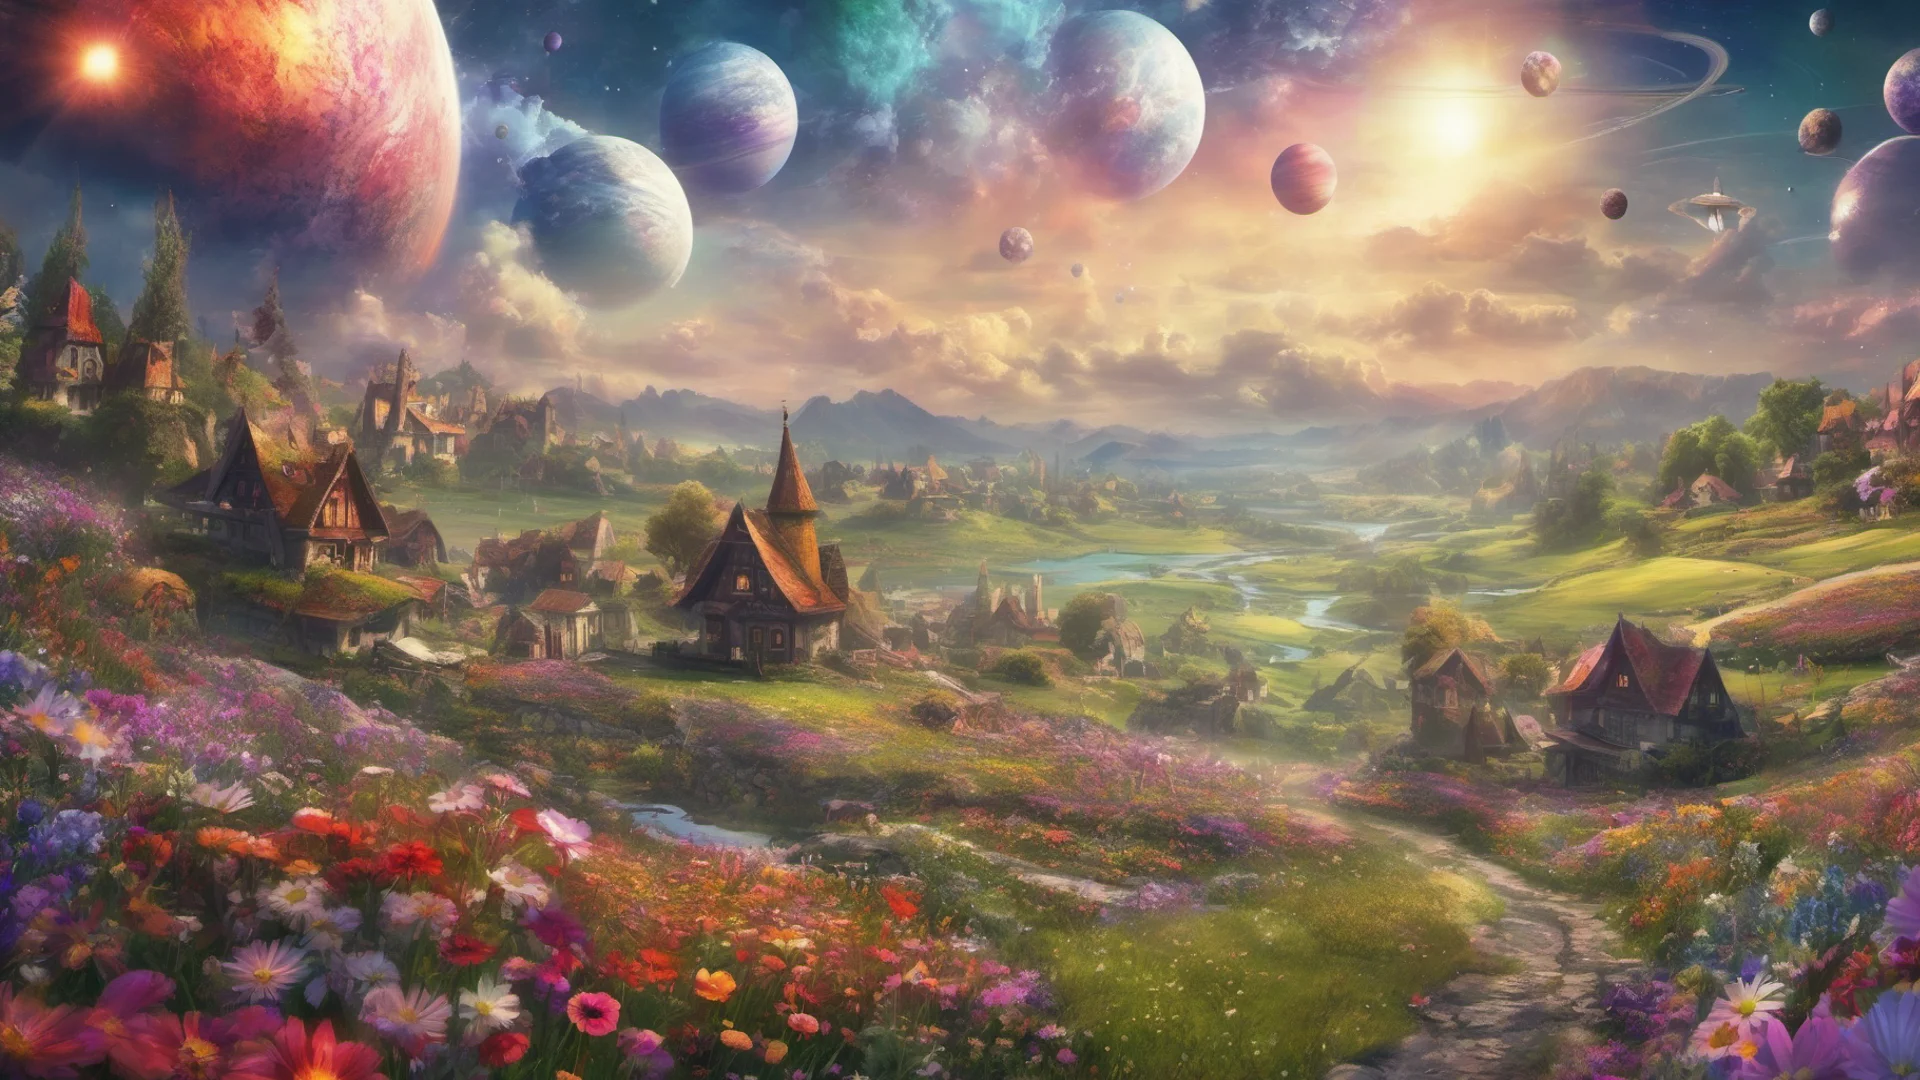 aiepic fantasy background colorful flower meadows village covered in flowers two saturn ringed planets overhead confident engaging wow artstation art 3 wide